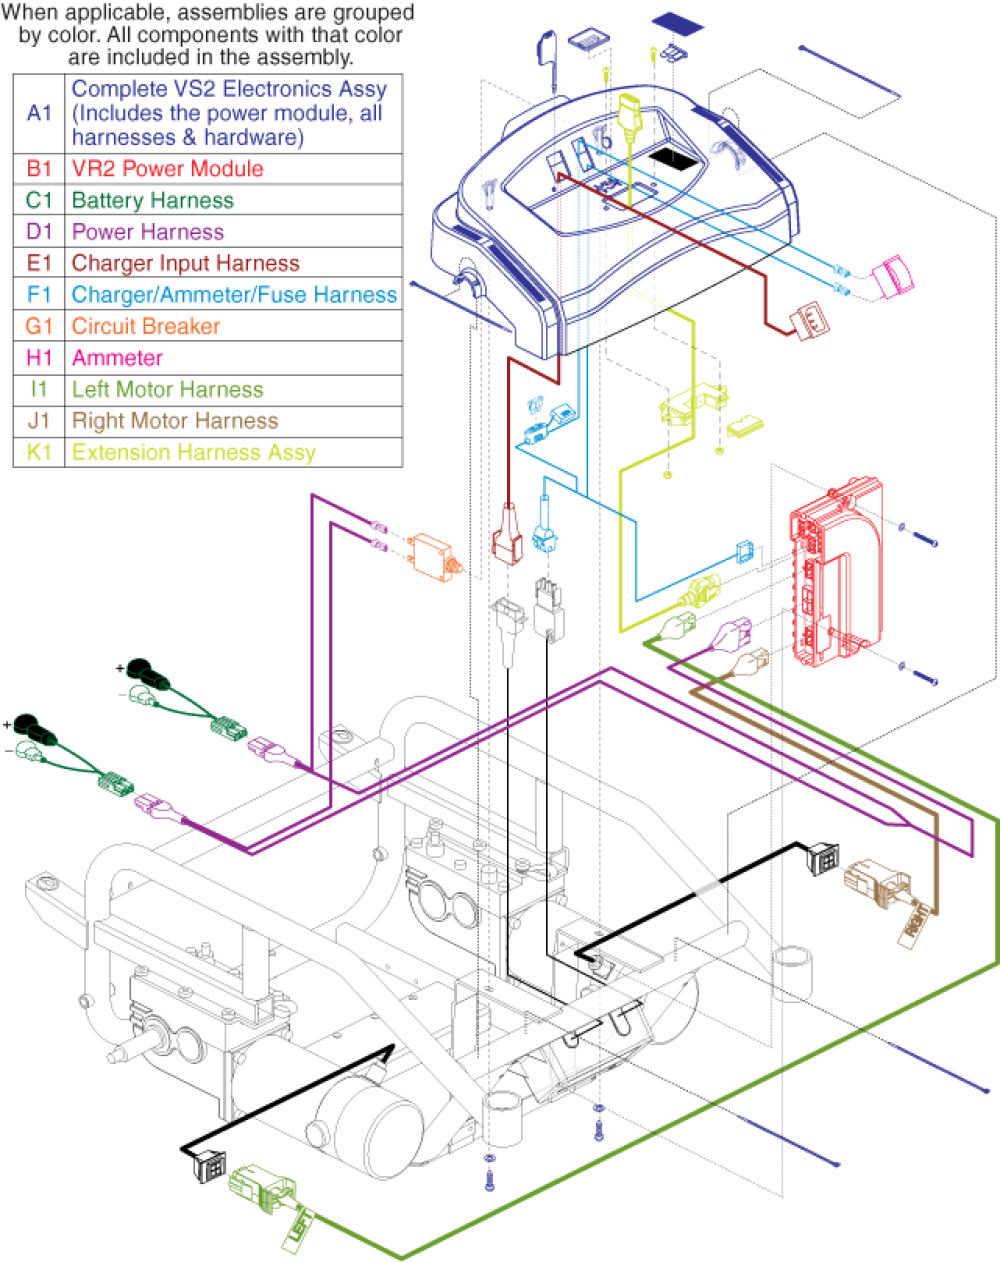 Utility Tray Assembly - Vr2 parts diagram